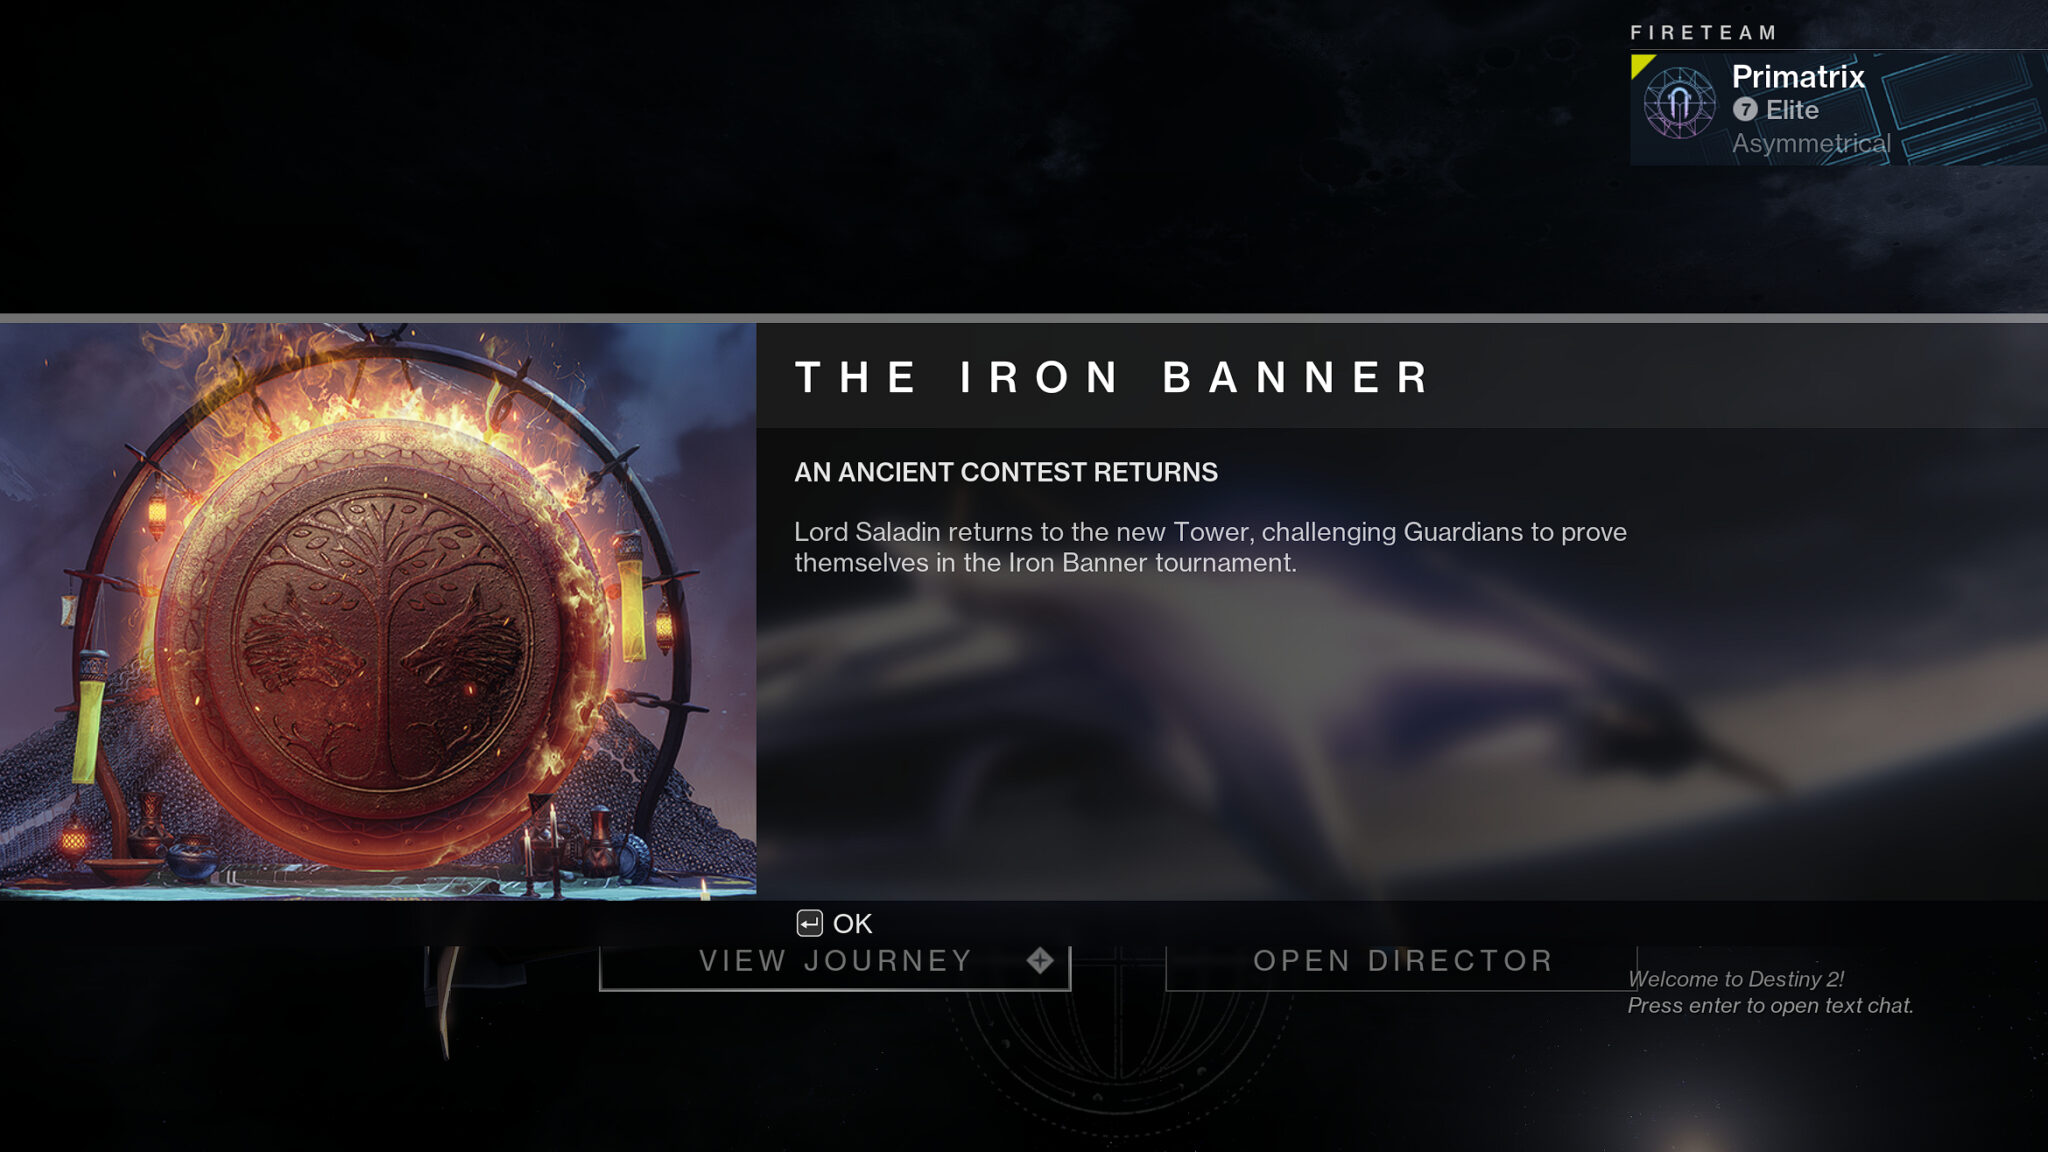 Destiny 2 Iron Banner Schedule, Challenges and more